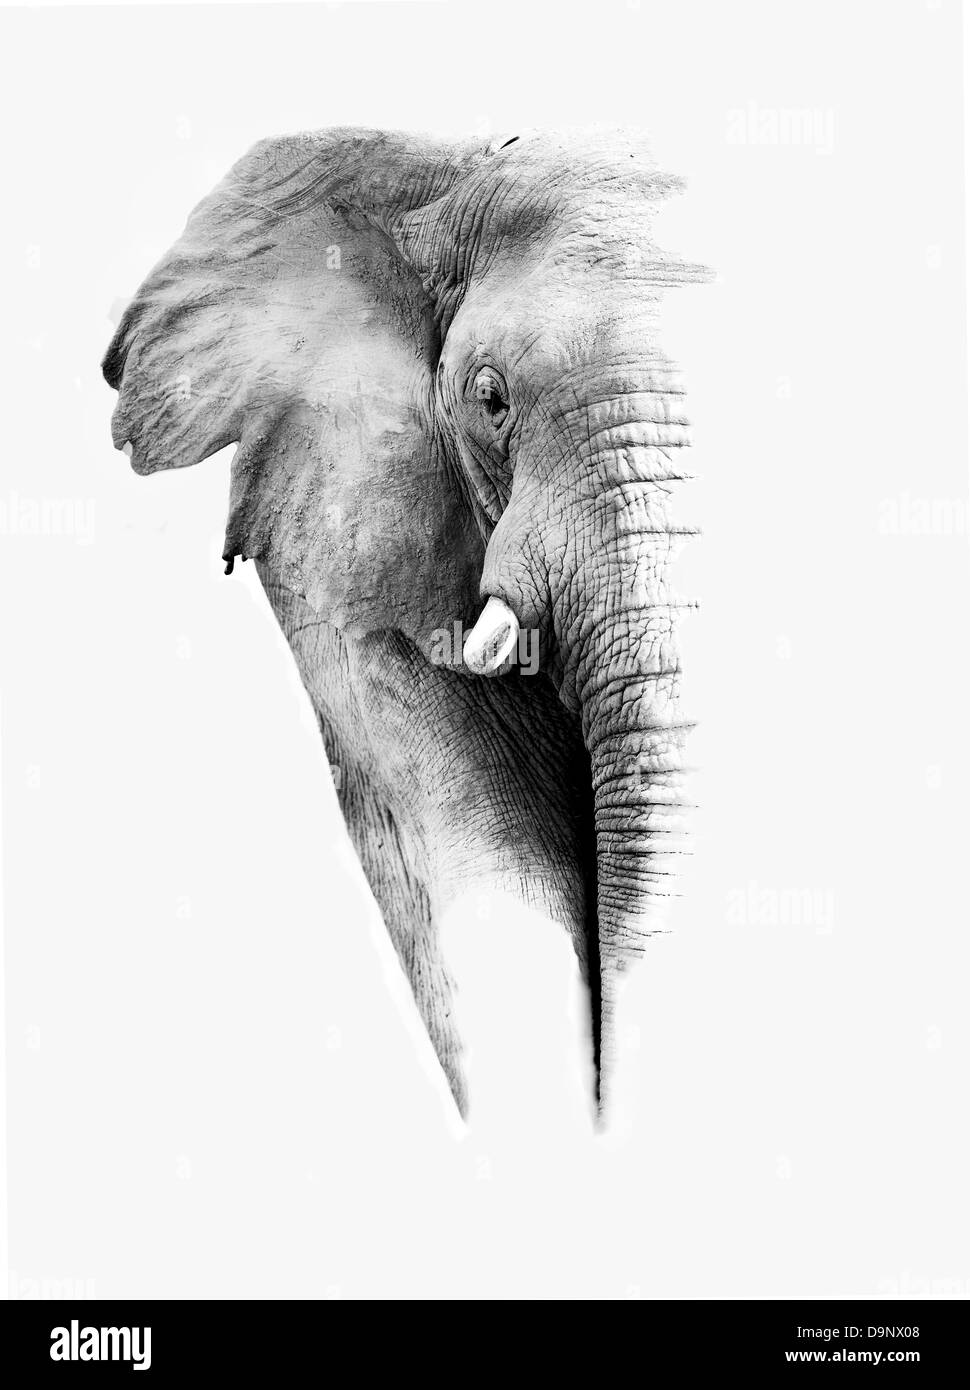 Artistic black and white image of an African elephant Stock Photo